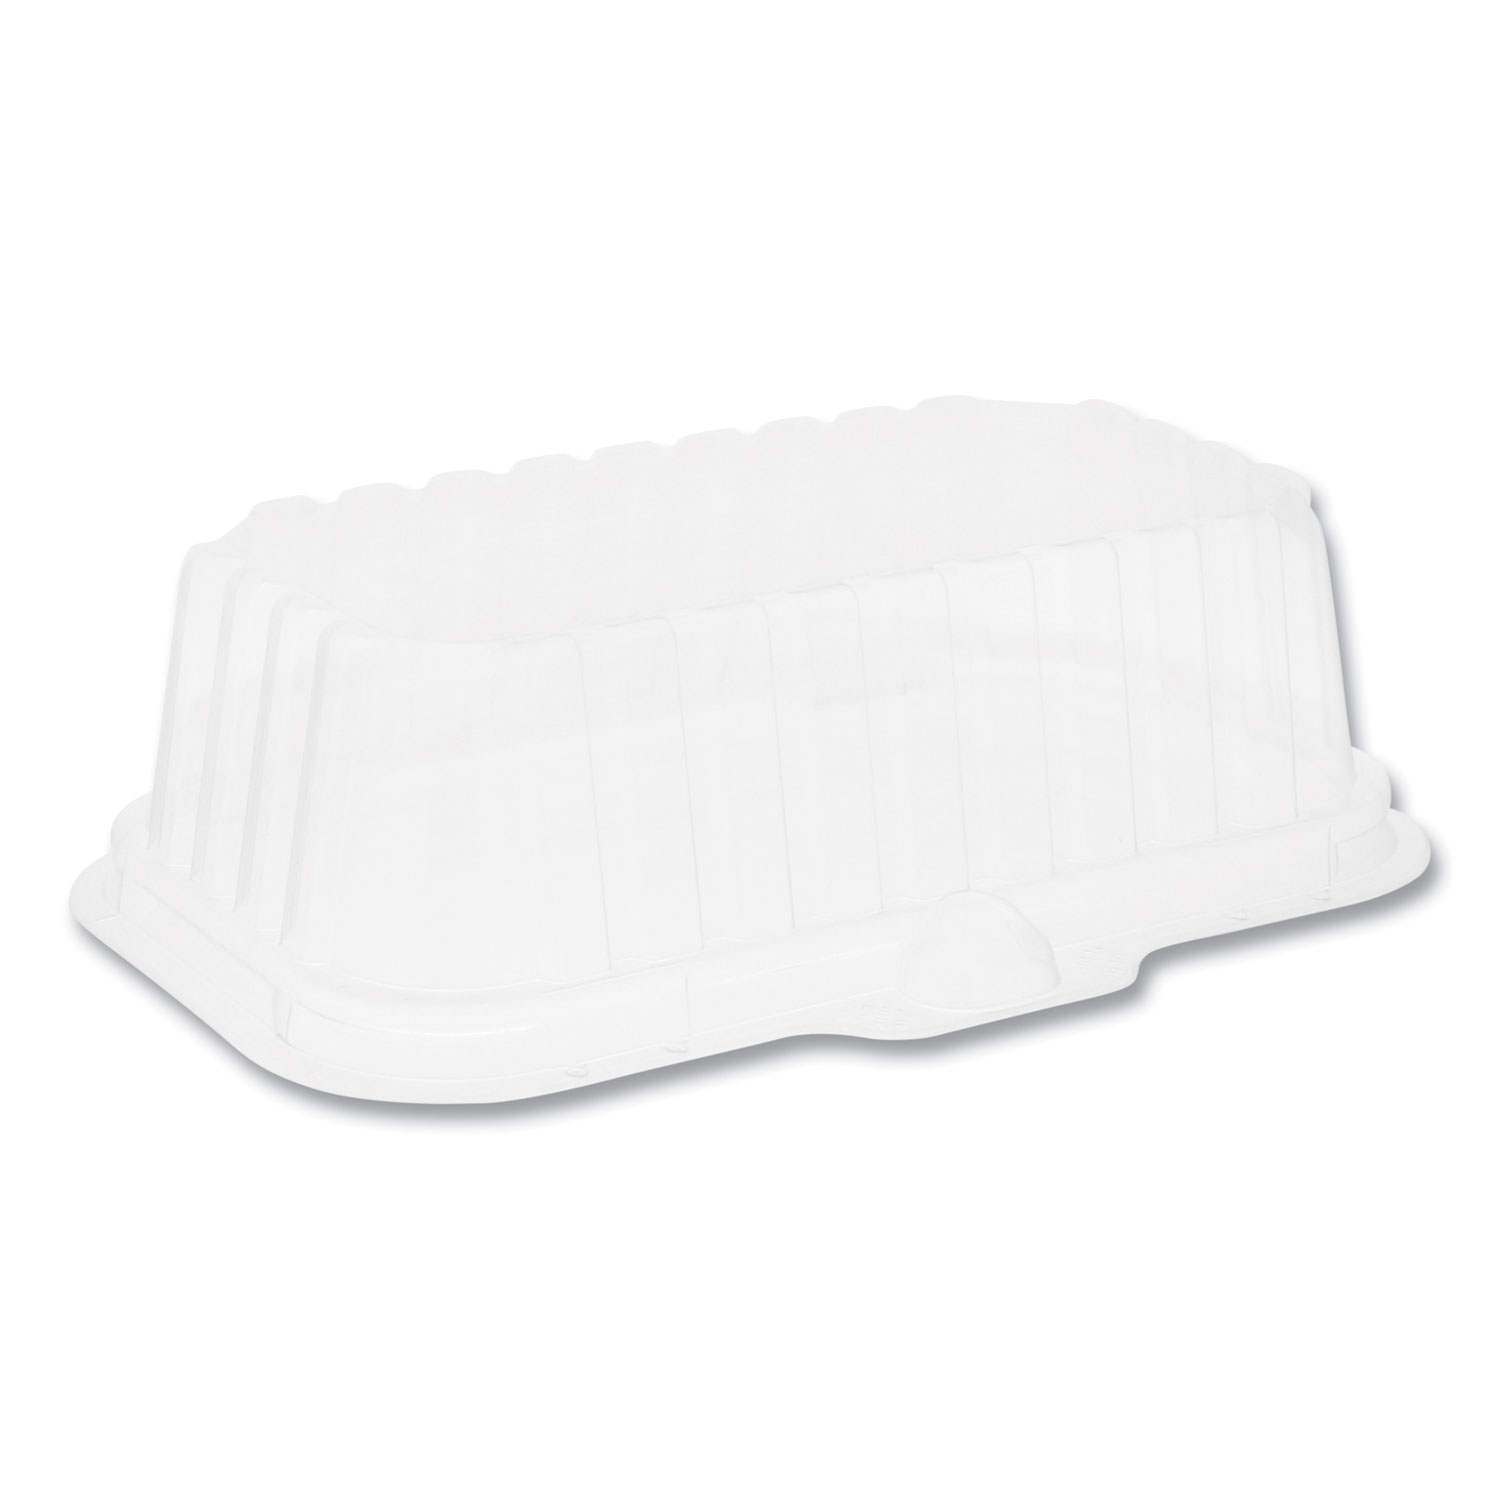 Pactiv OPS Traymate Dome-Style Lids, 17S Deep Dome, 8.3 x 4.8 x 2.1, Clear, 250/Carton